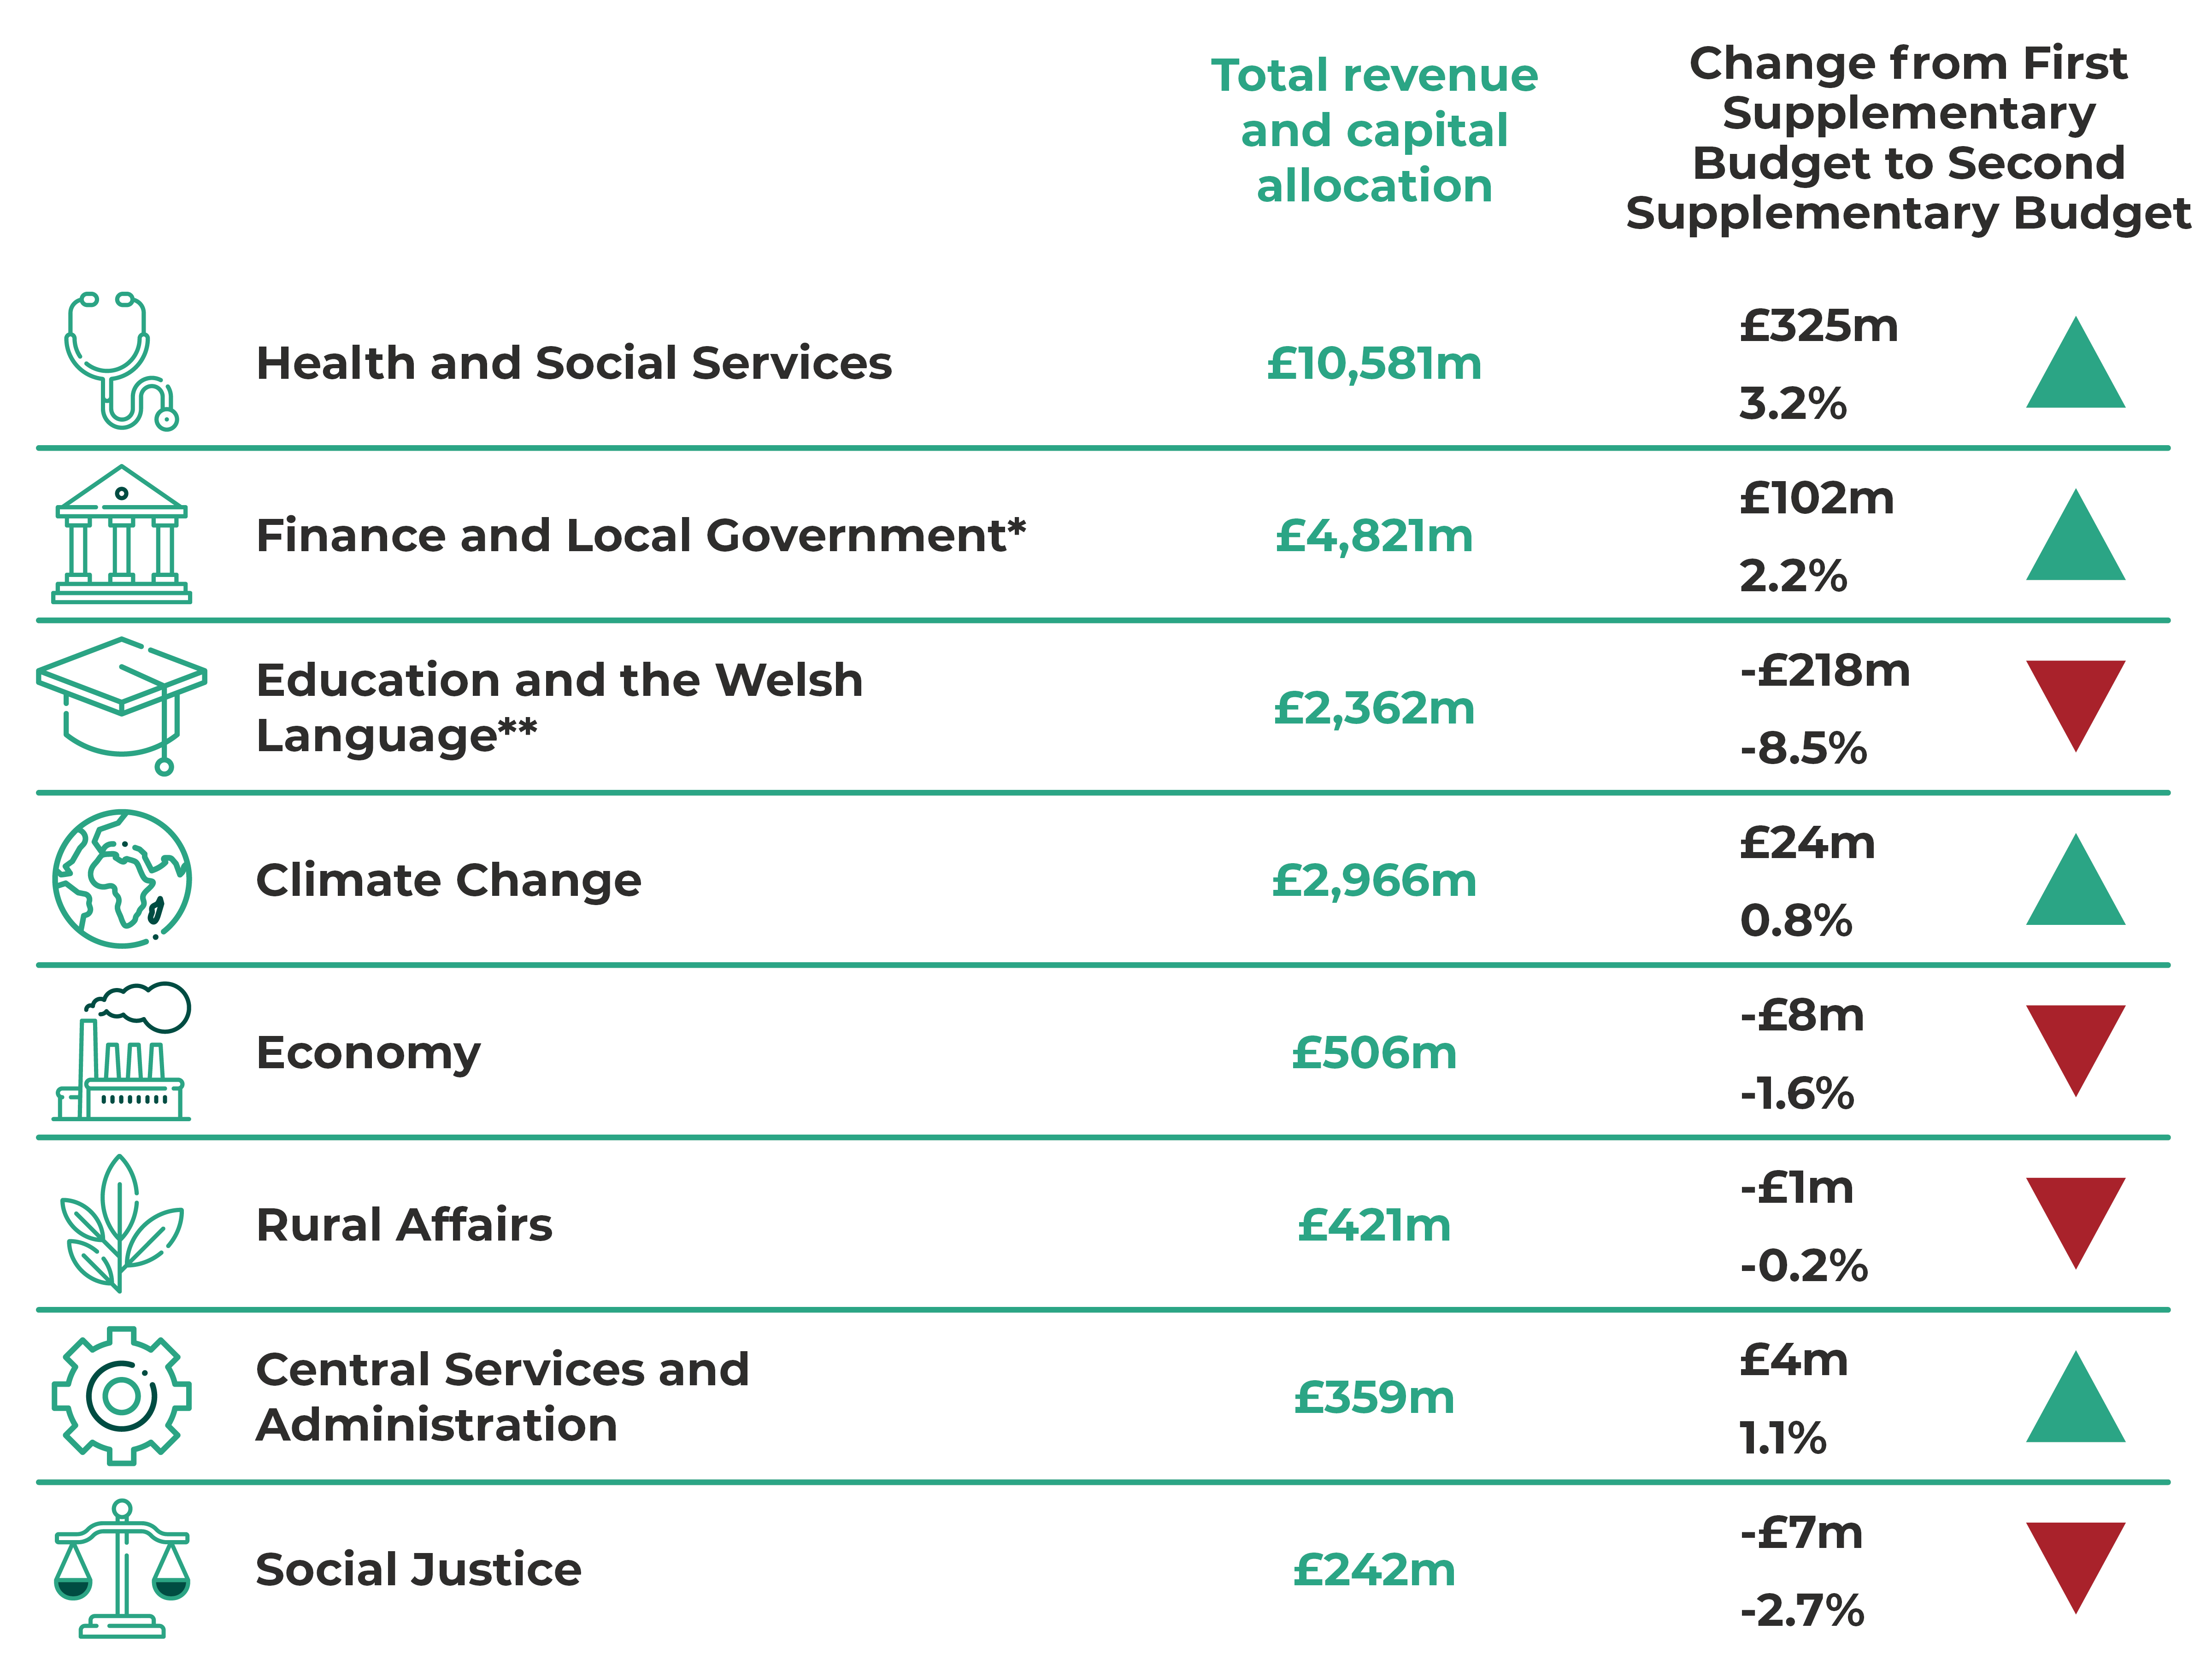 Table of total revenue and capital allocation by department. Health and Social Services: £10581m (up by £325m or 3.2%). Finance and Local Government: £4821m (up by £102m or 2.2%). Education and the Welsh Language: £2362m (down by £218m or -8.5%). Climate Change: £2966m (up by £24m or 0.8%). Economy: £506m (down by £8m or -1.6%). Rural Affairs: £421m (down by £1m or -0.2%). Central Services and Administration: £359m (up by £4m or 1.1%). Social Justice: £242m (down by £7m or -2.7%).